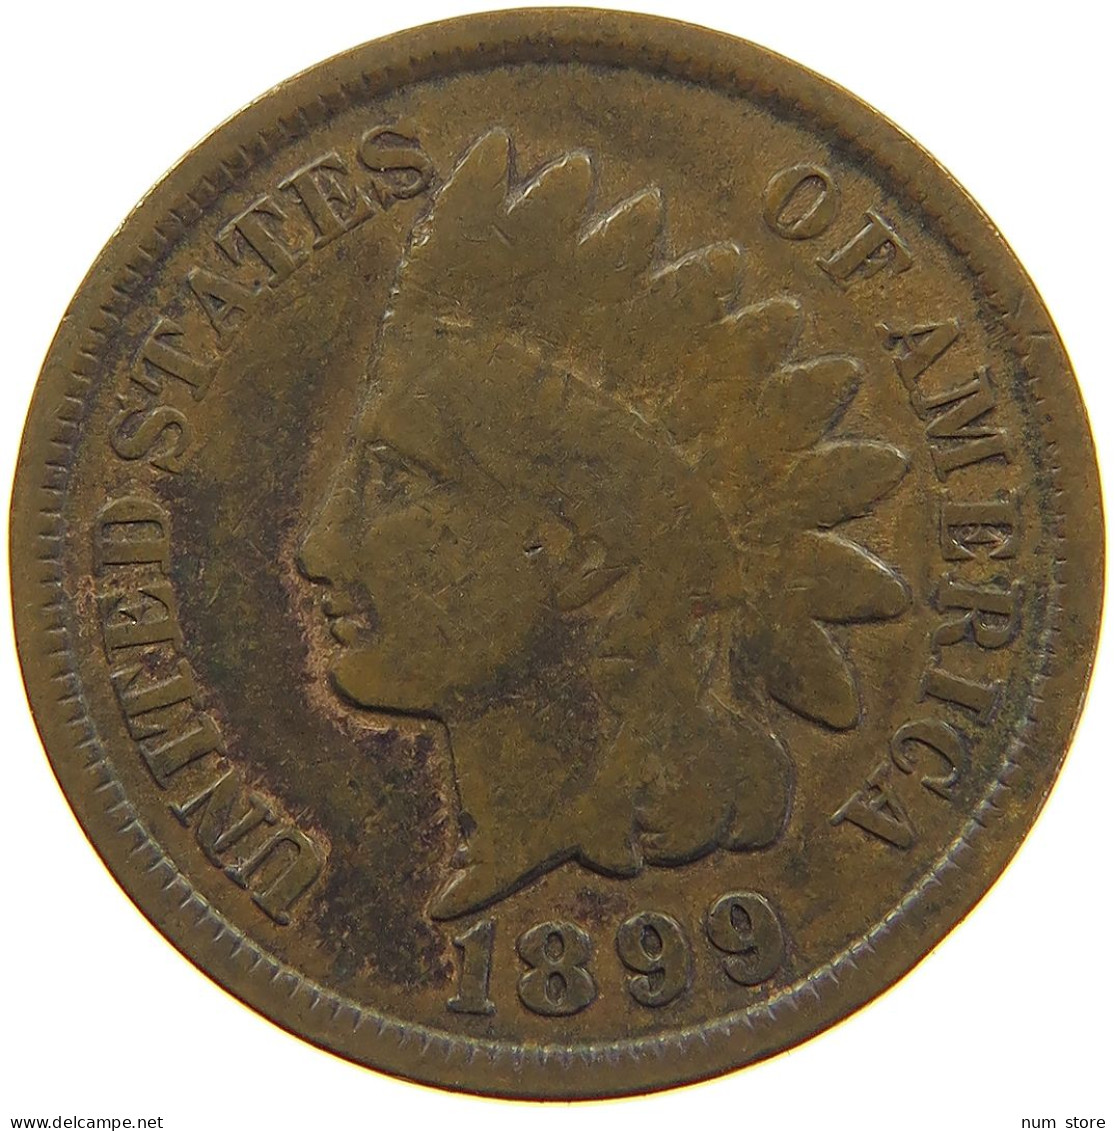 UNITED STATES OF AMERICA CENT 1899 INDIAN HEAD #c017 0343 - 1859-1909: Indian Head